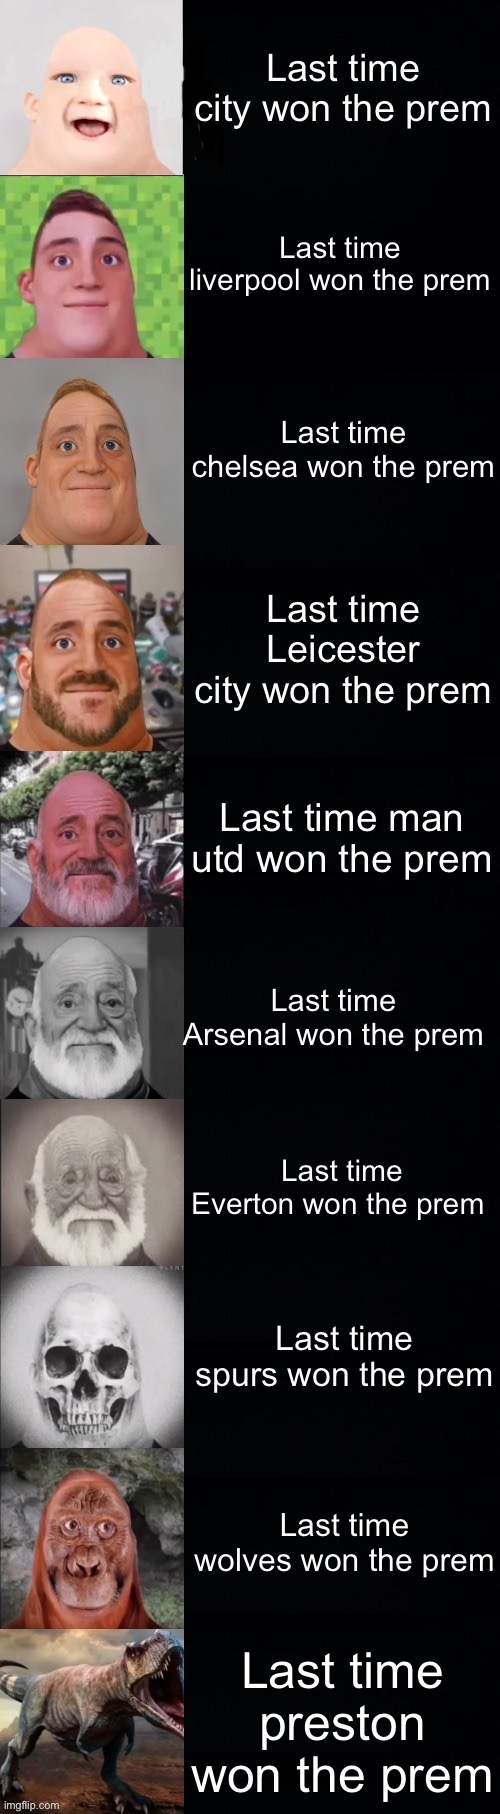 I know it wasn’t called the prem last time spurs won it, but still. | Last time city won the prem; Last time liverpool won the prem; Last time chelsea won the prem; Last time Leicester city won the prem; Last time man utd won the prem; Last time Arsenal won the prem; Last time Everton won the prem; Last time spurs won the prem; Last time wolves won the prem; Last time preston won the prem | image tagged in mr incredible becoming old,premier league | made w/ Imgflip meme maker